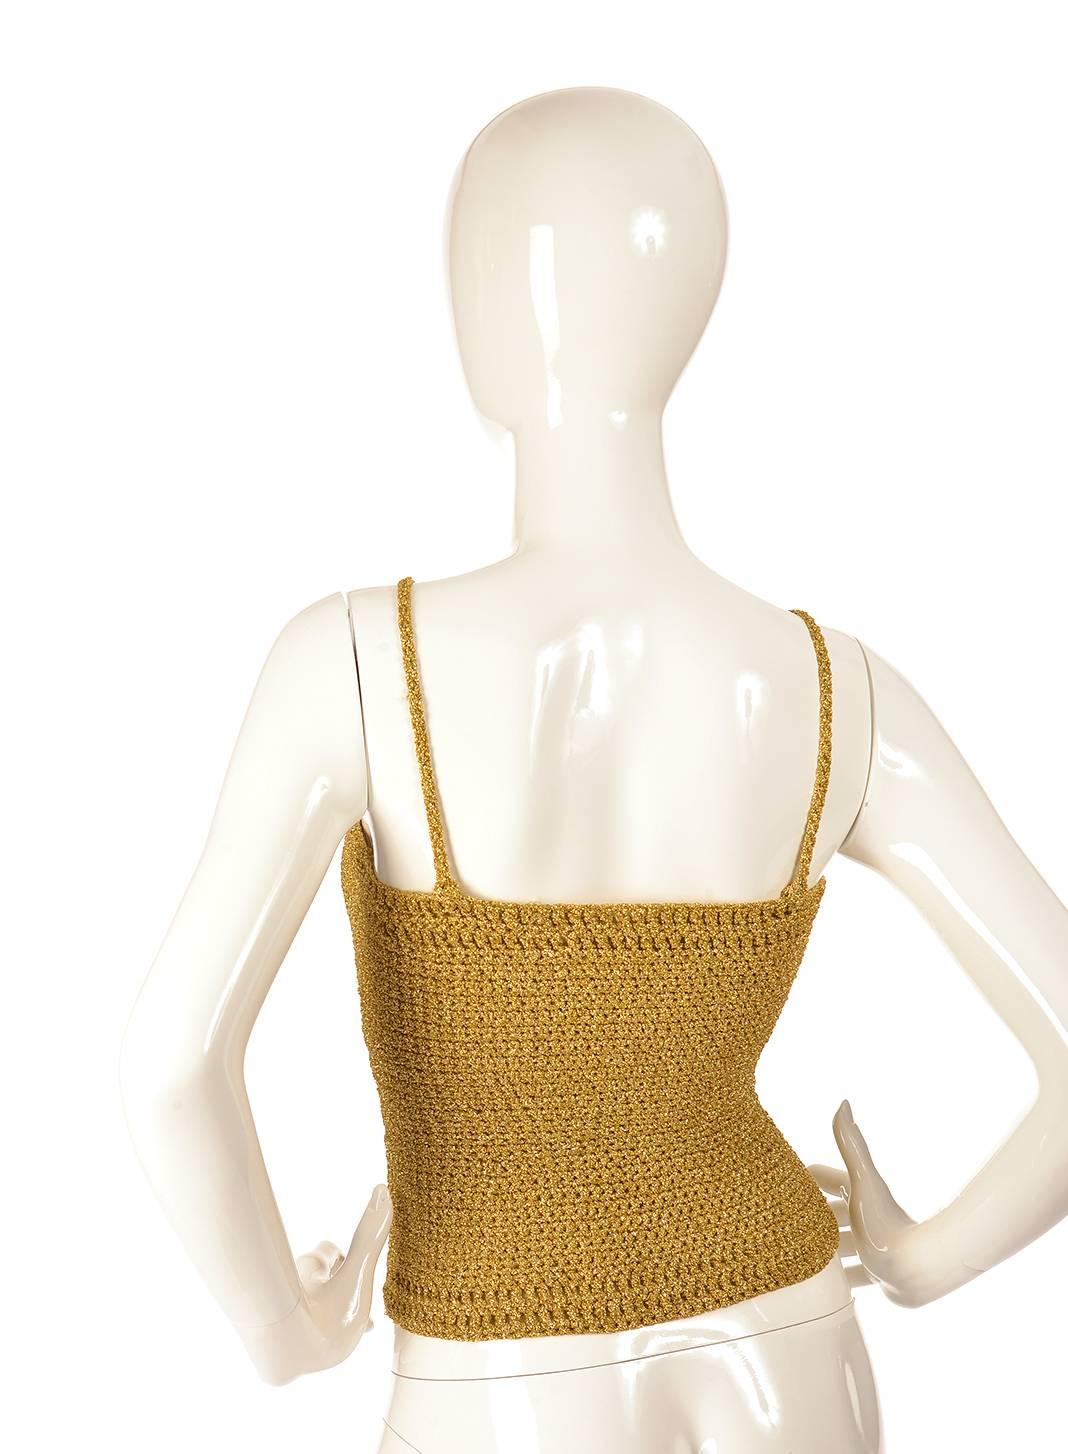 
Fun and girly gold knit metallic crop top. This top is tightly knitted together in a weave pattern, using gold yarn with metallic gold thread interspersed through out the top. The top has spaghetti straps, and can be pulled over the head.